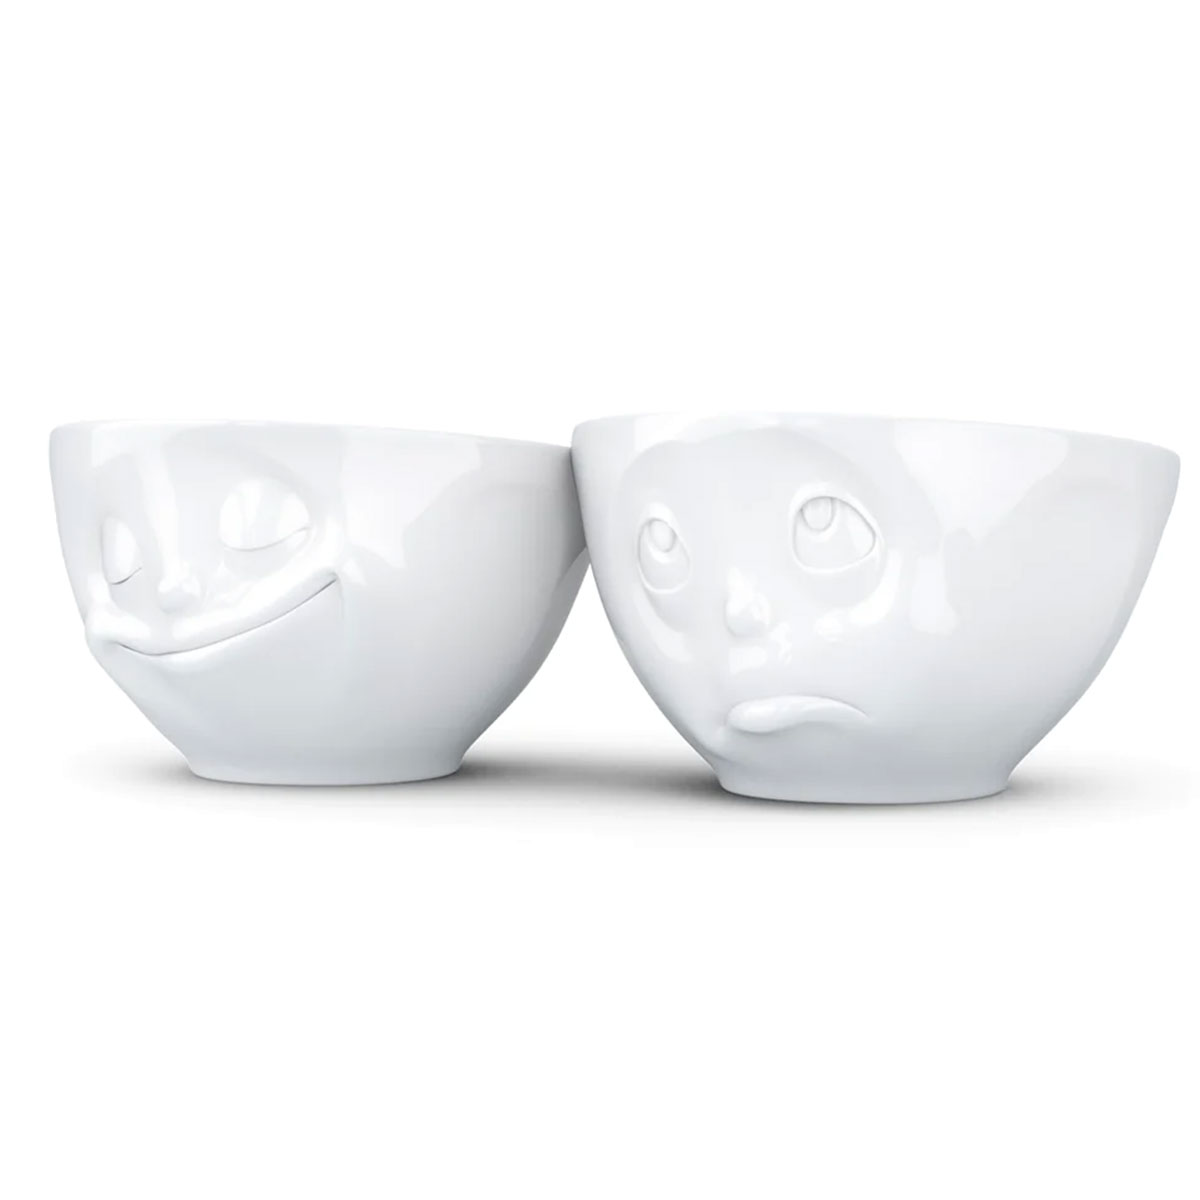 Set of 2 Small Porcelain Bowls by Tassen - Happy and oh please